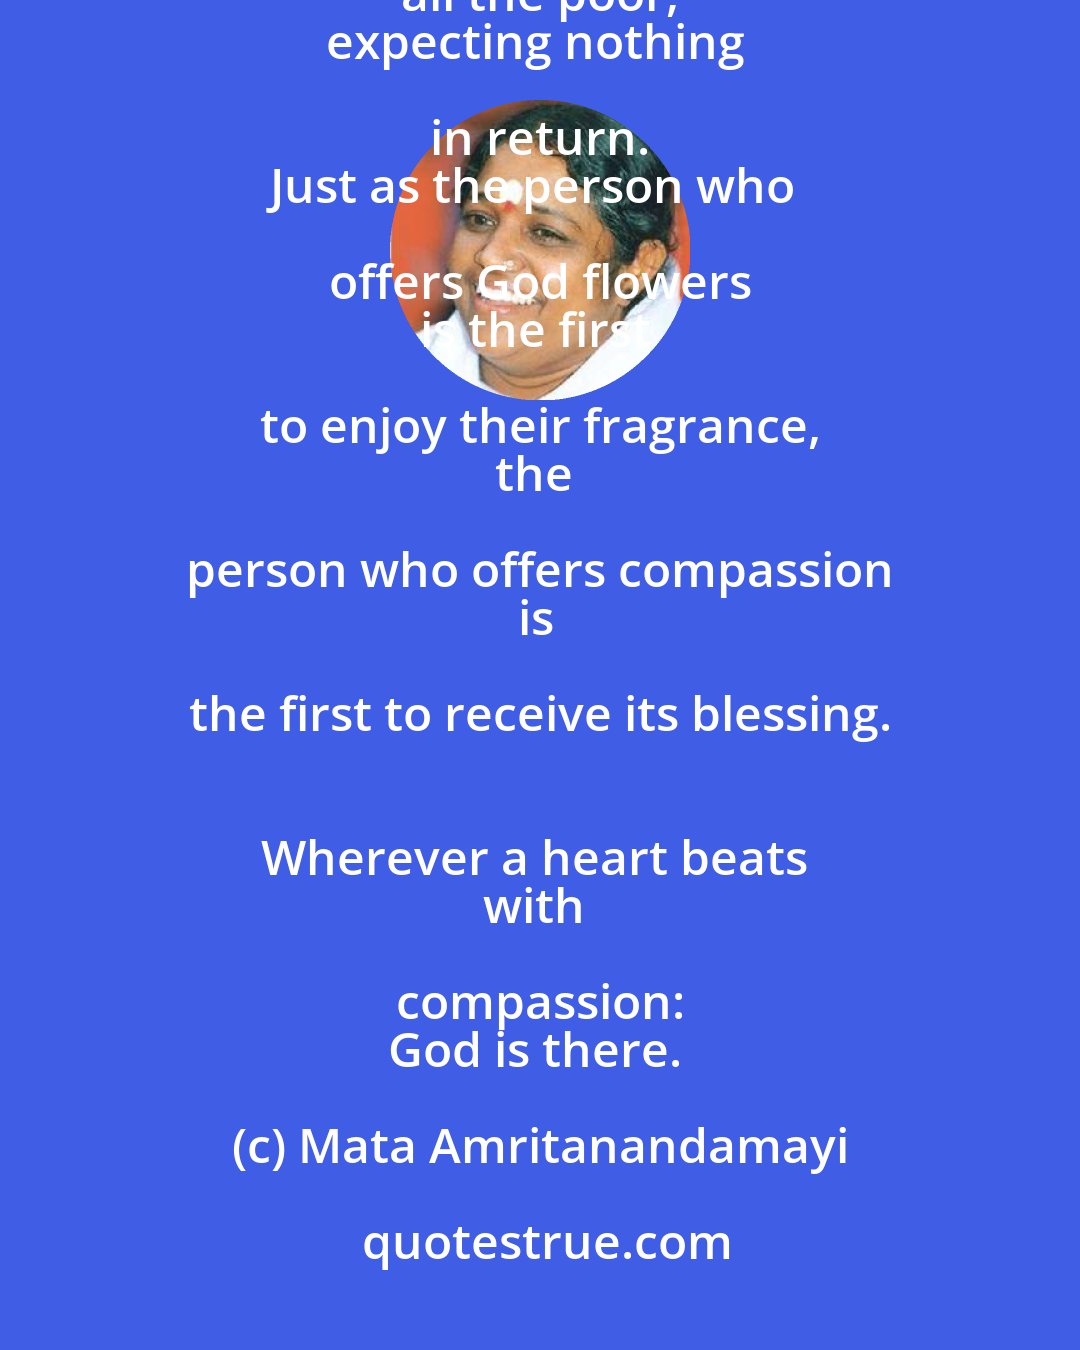 Mata Amritanandamayi: Children, don't waste a single second. 
Serve others, above all the poor, 
expecting nothing in return. 
Just as the person who offers God flowers 
is the first to enjoy their fragrance, 
the person who offers compassion 
is the first to receive its blessing. 
Wherever a heart beats 
with compassion: 
God is there.